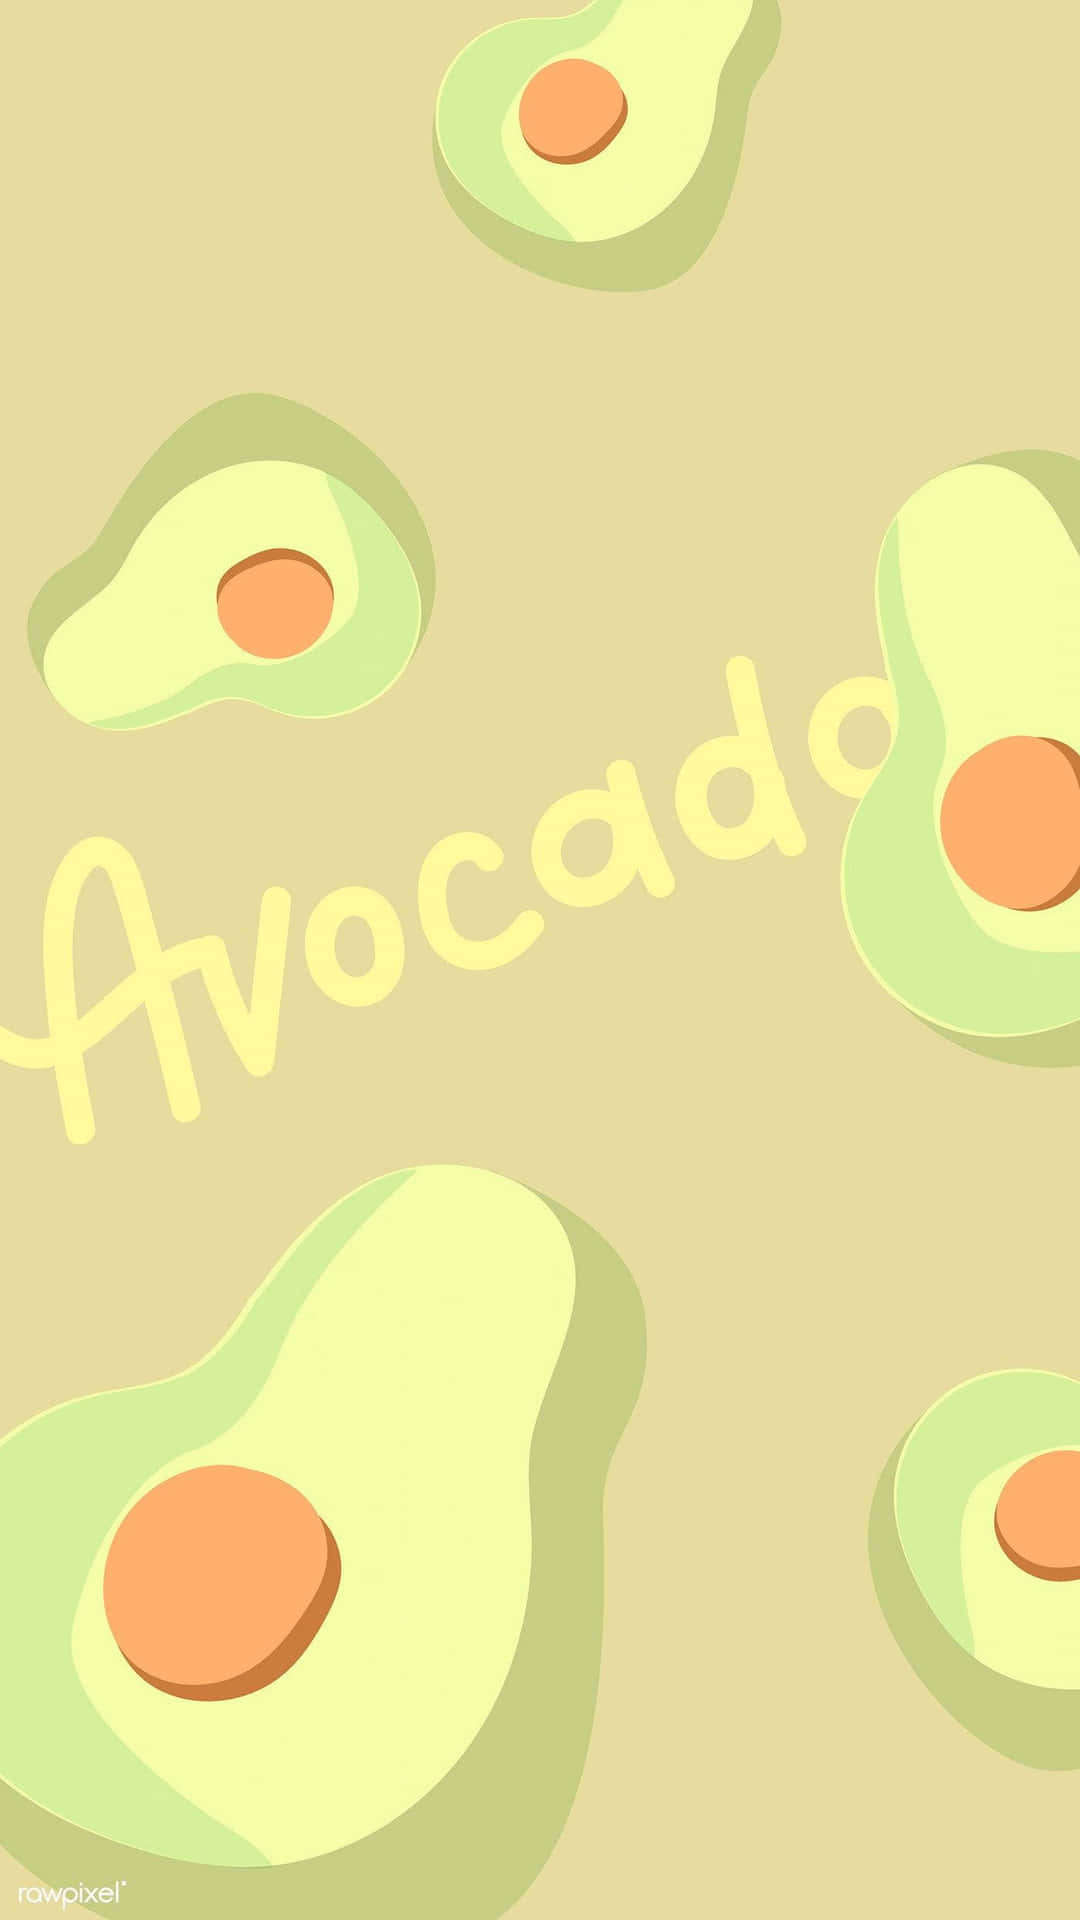 Avocados On A Beige Background With The Word Avocado Wallpaper